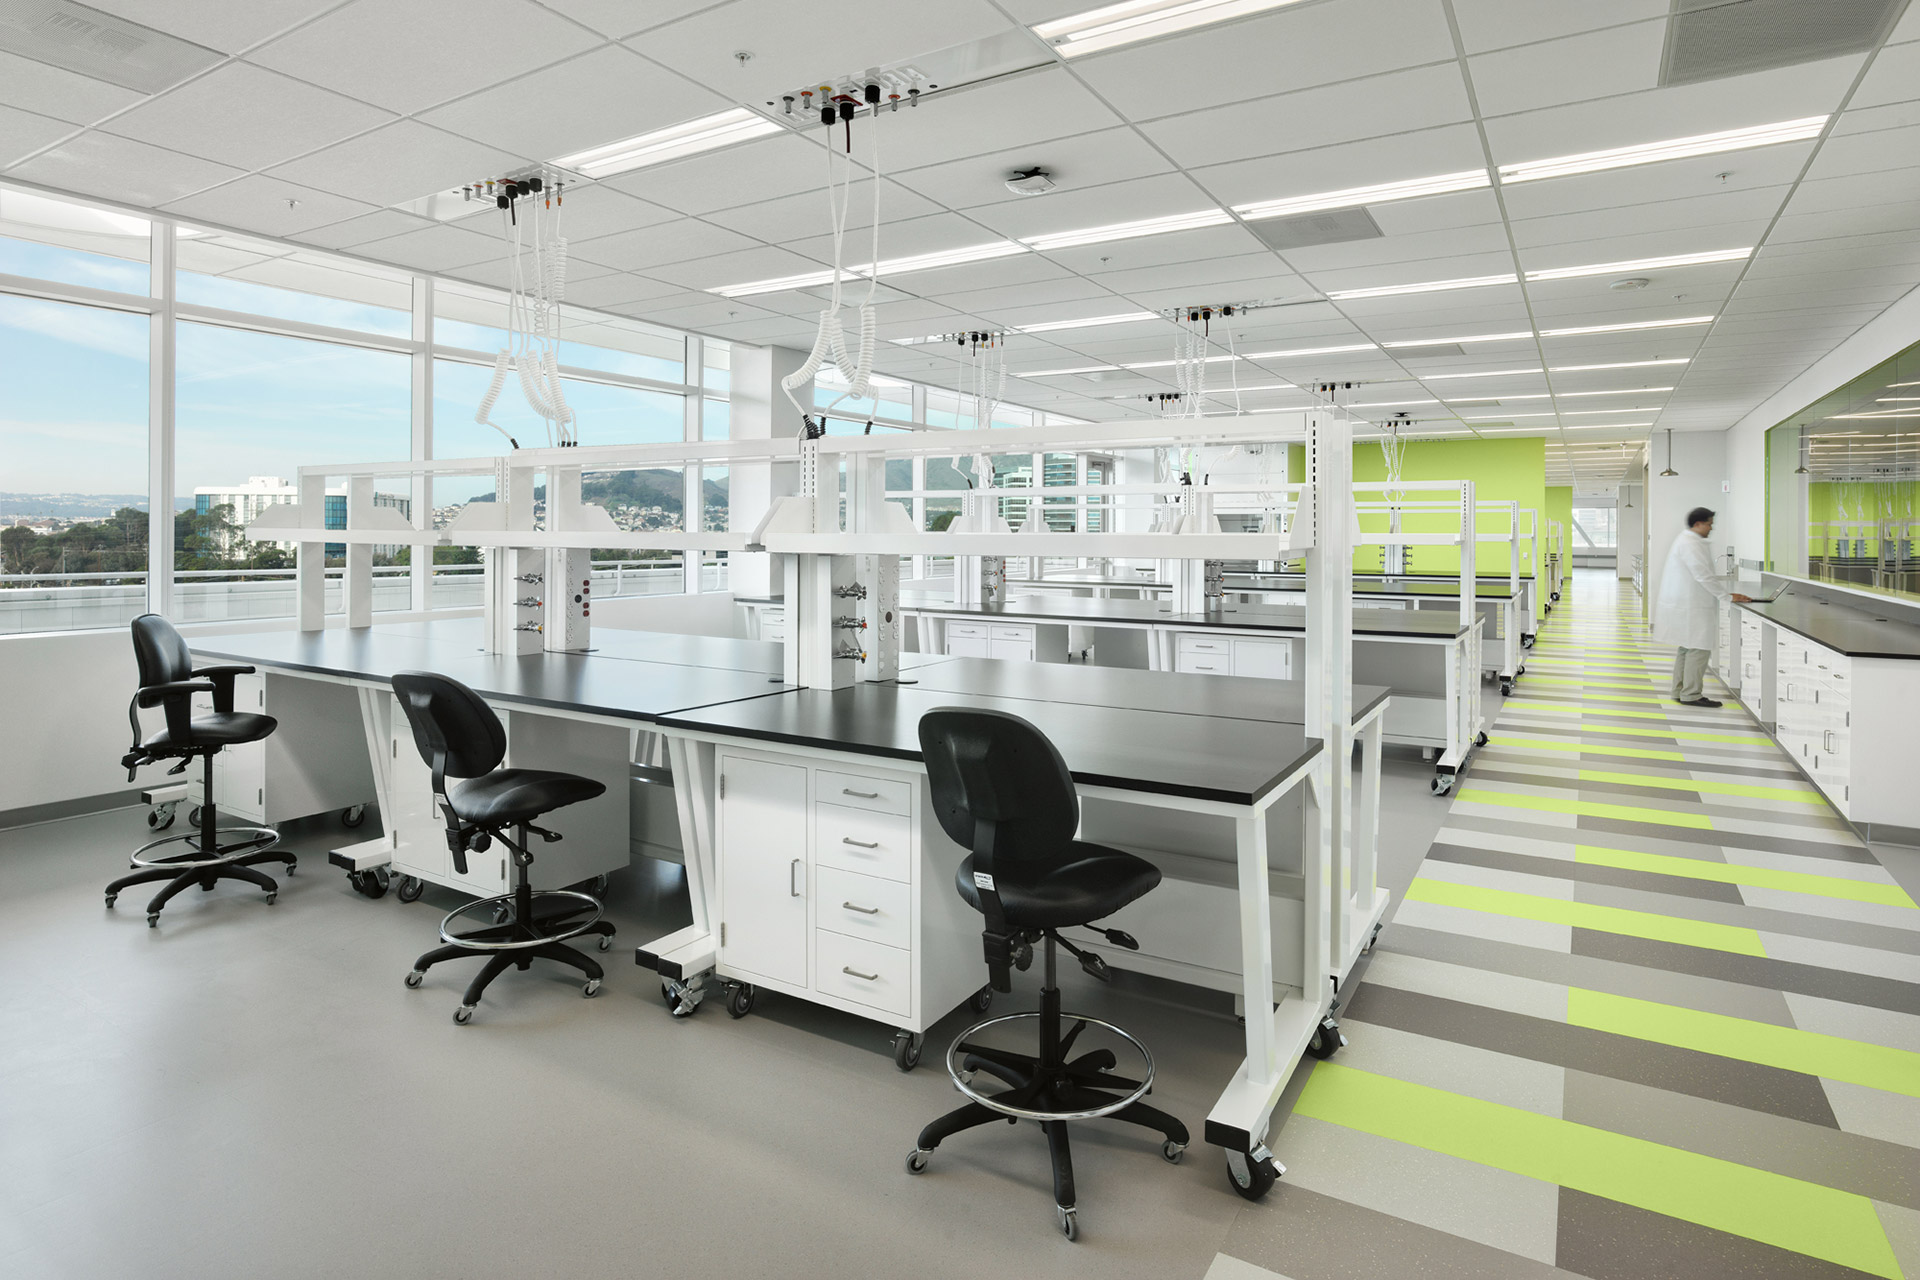 Interior at a confidential life science facility, lab with person in lab coat working